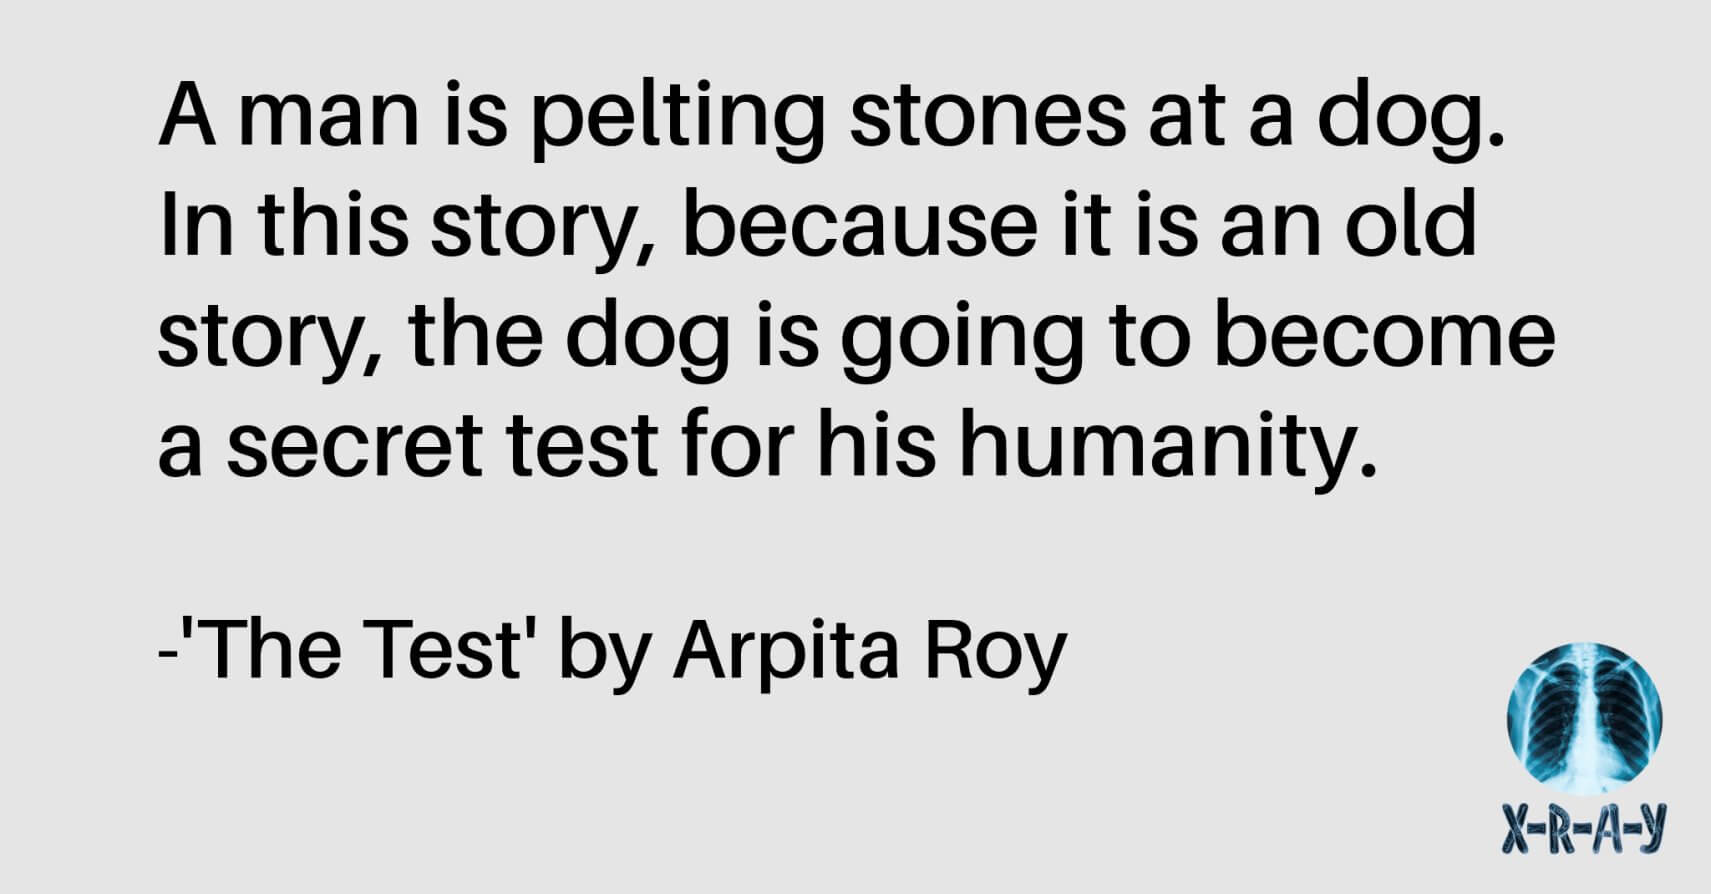 THE TEST by Arpita Roy